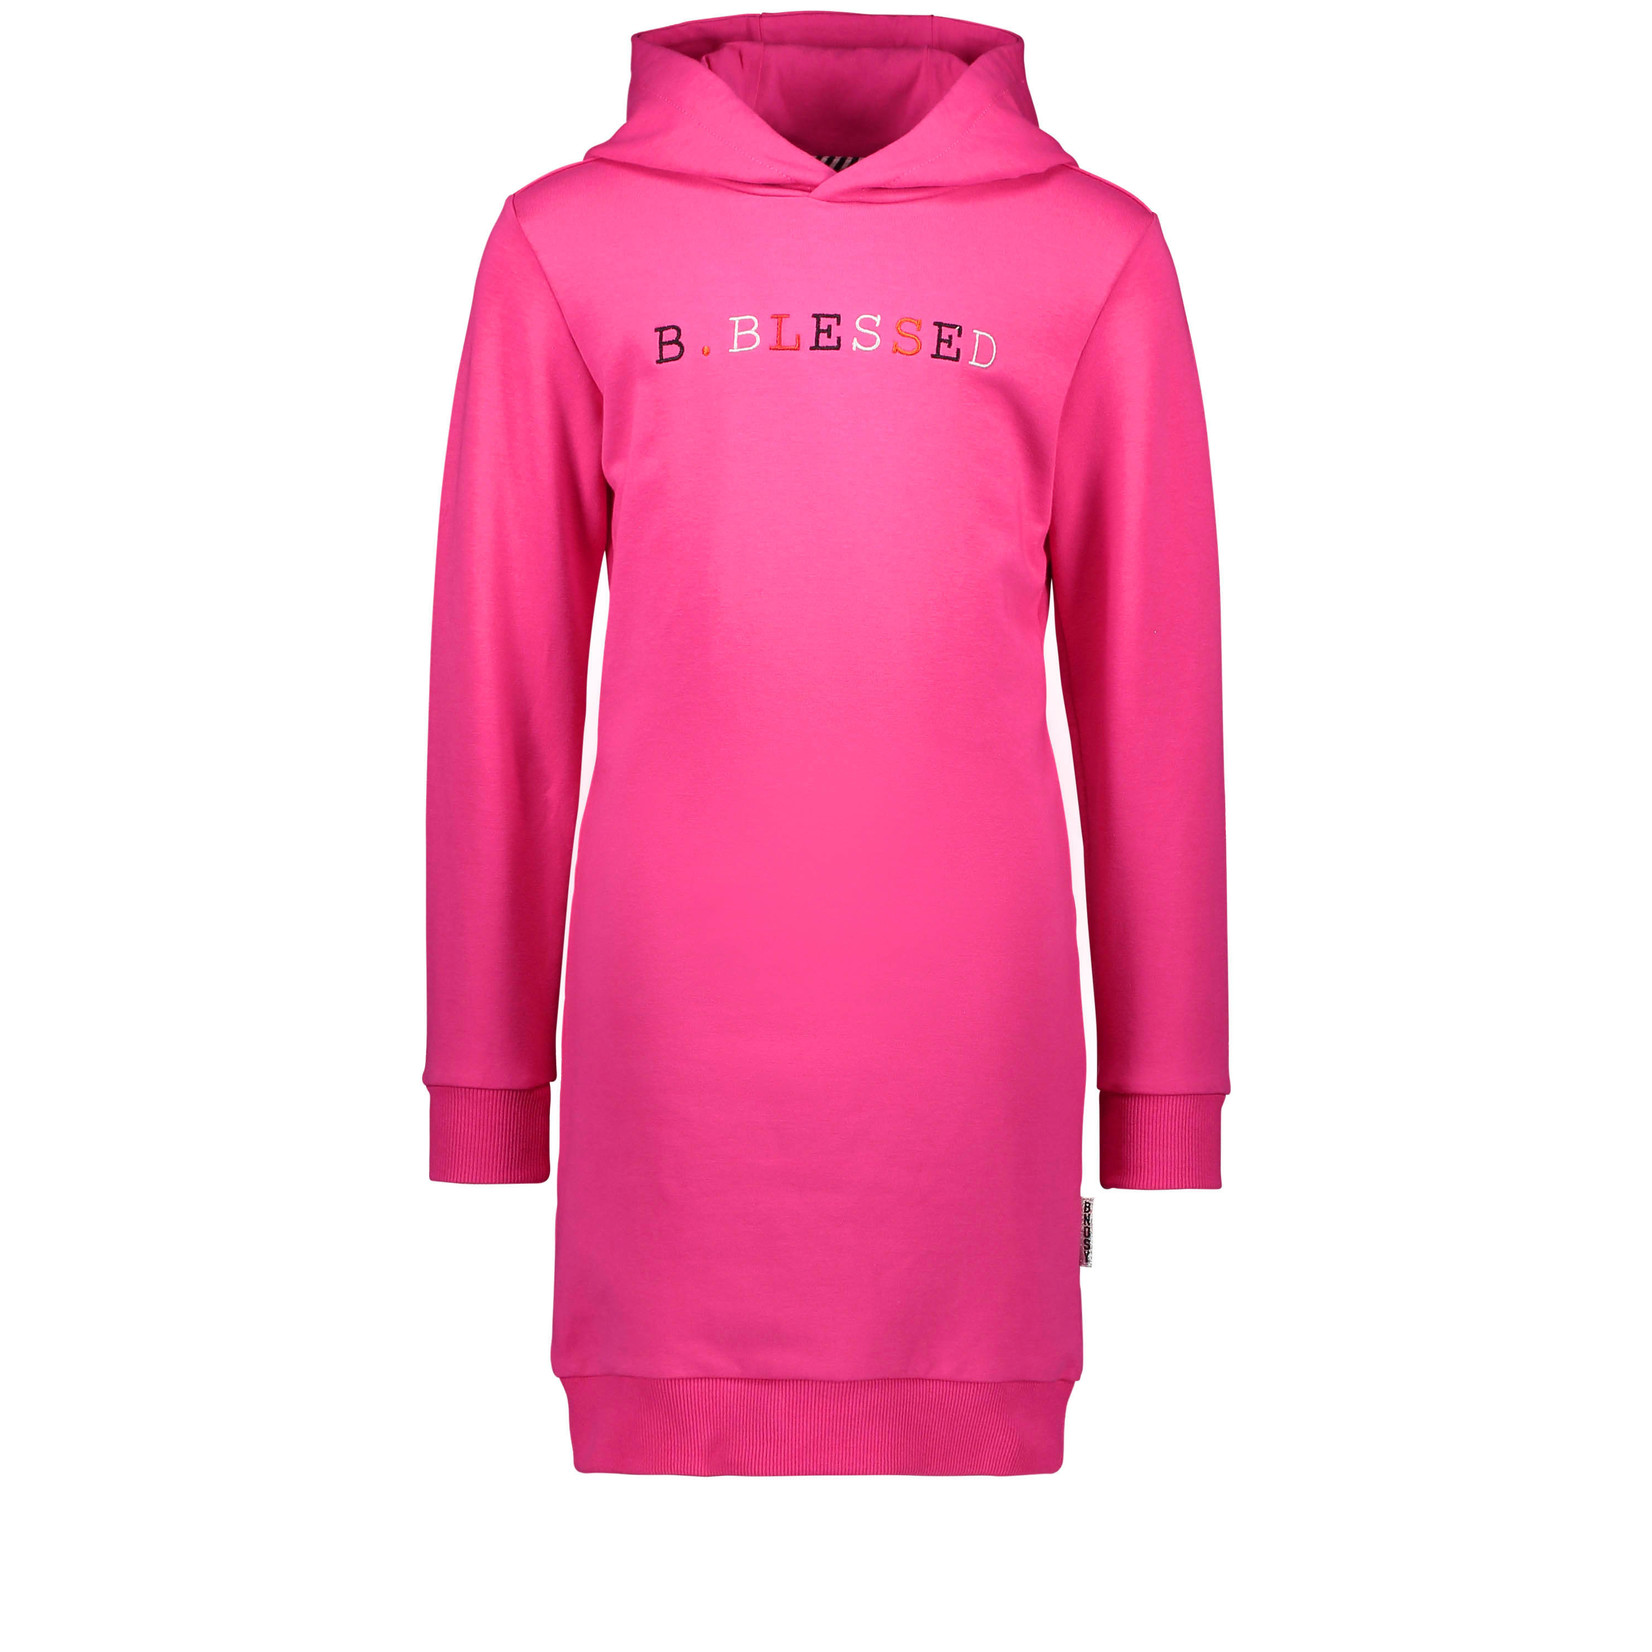 B-nosy Girls hooded dress with artwork on chest